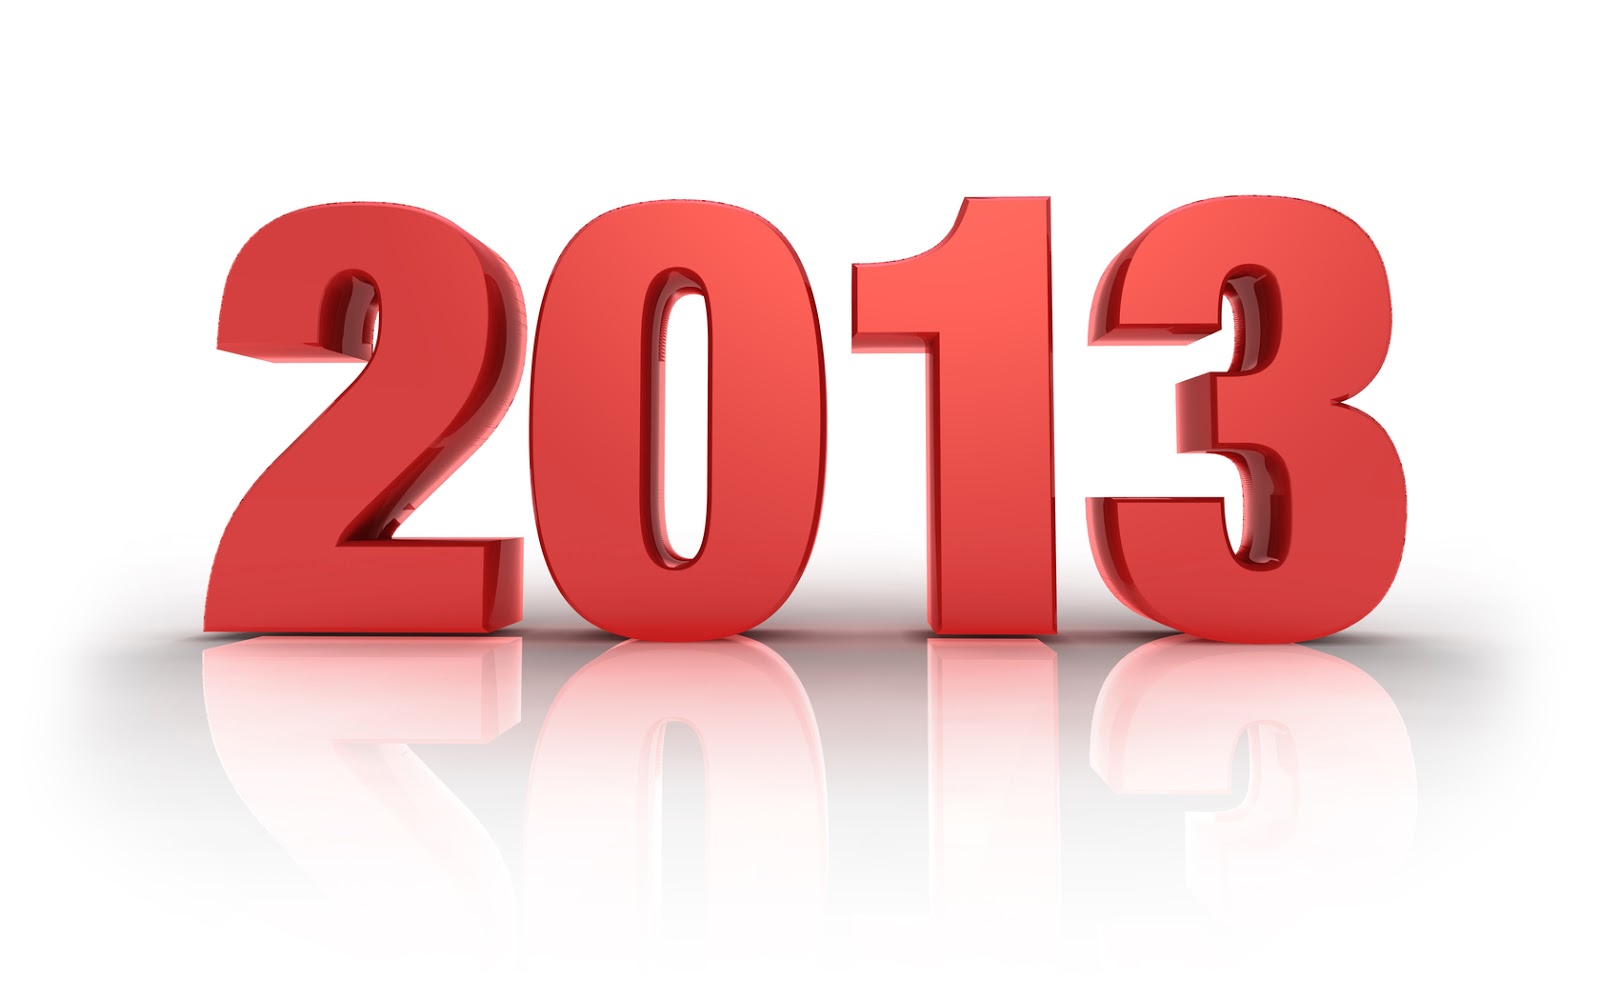 ... text 2014 picture happy new year wallpapers images photos 3d text 2014